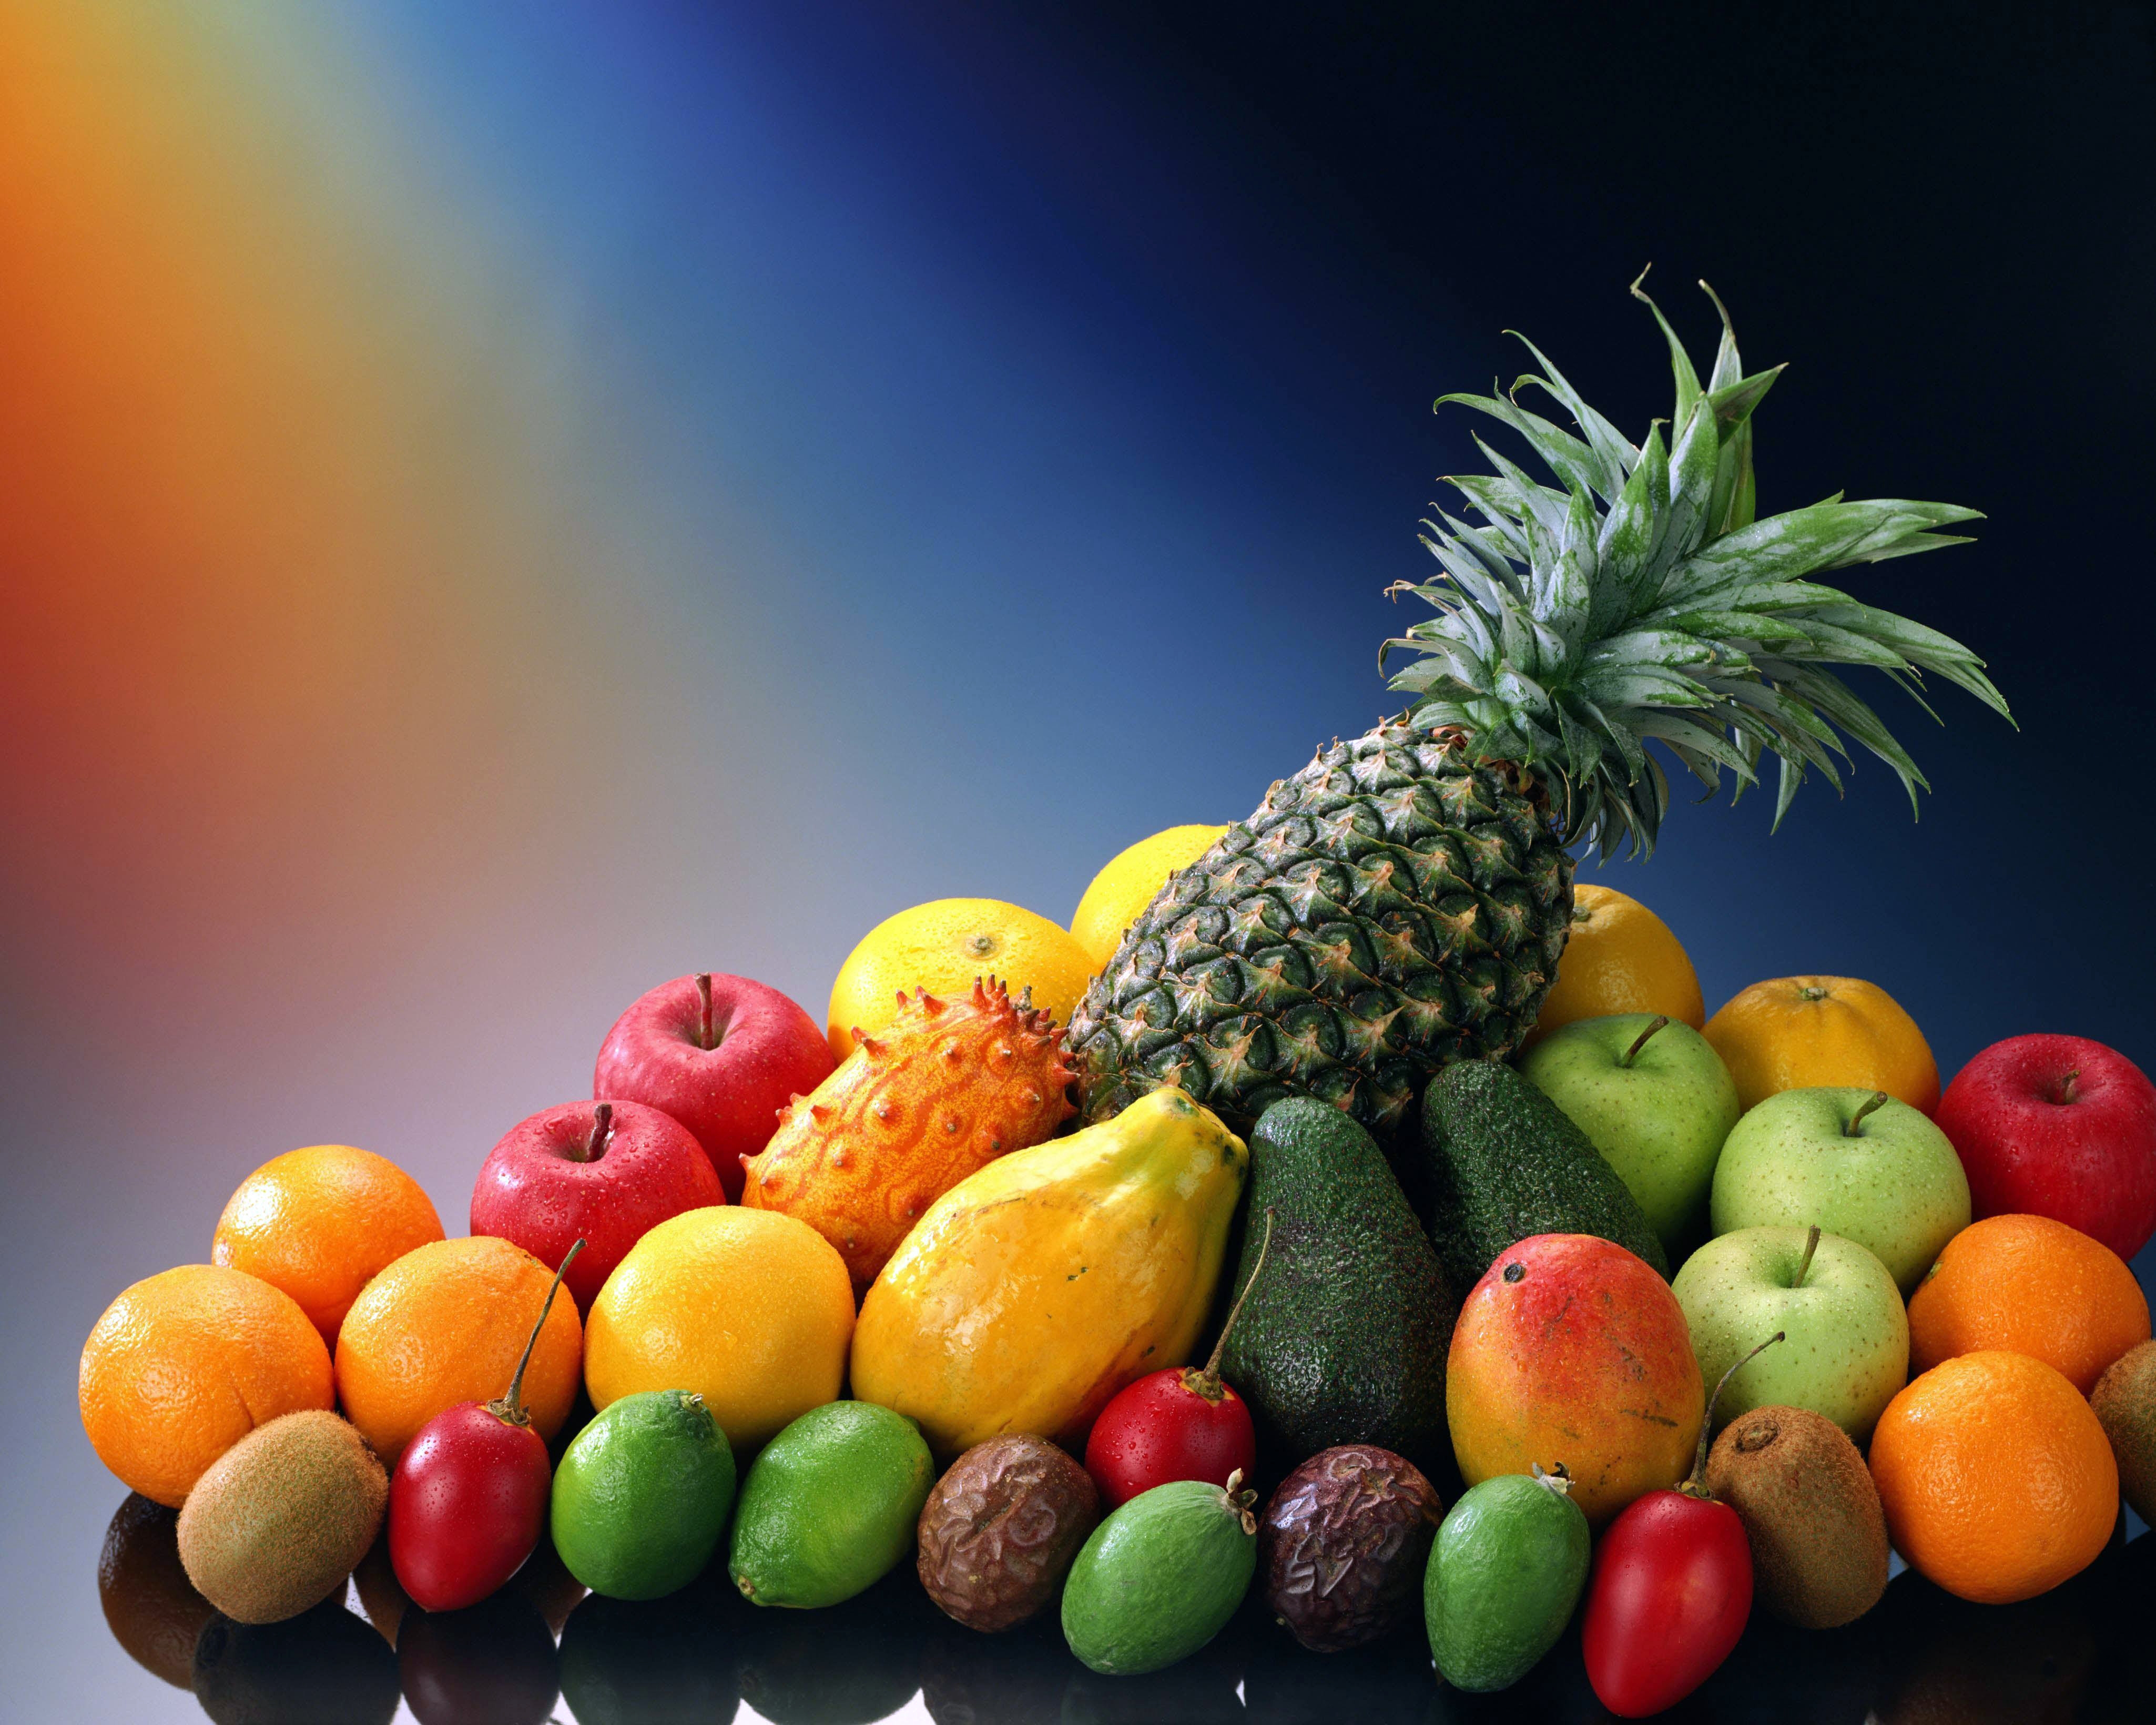 136348 download wallpaper fruits, food, apple, kiwi, avocado, exotic, pineapple screensavers and pictures for free